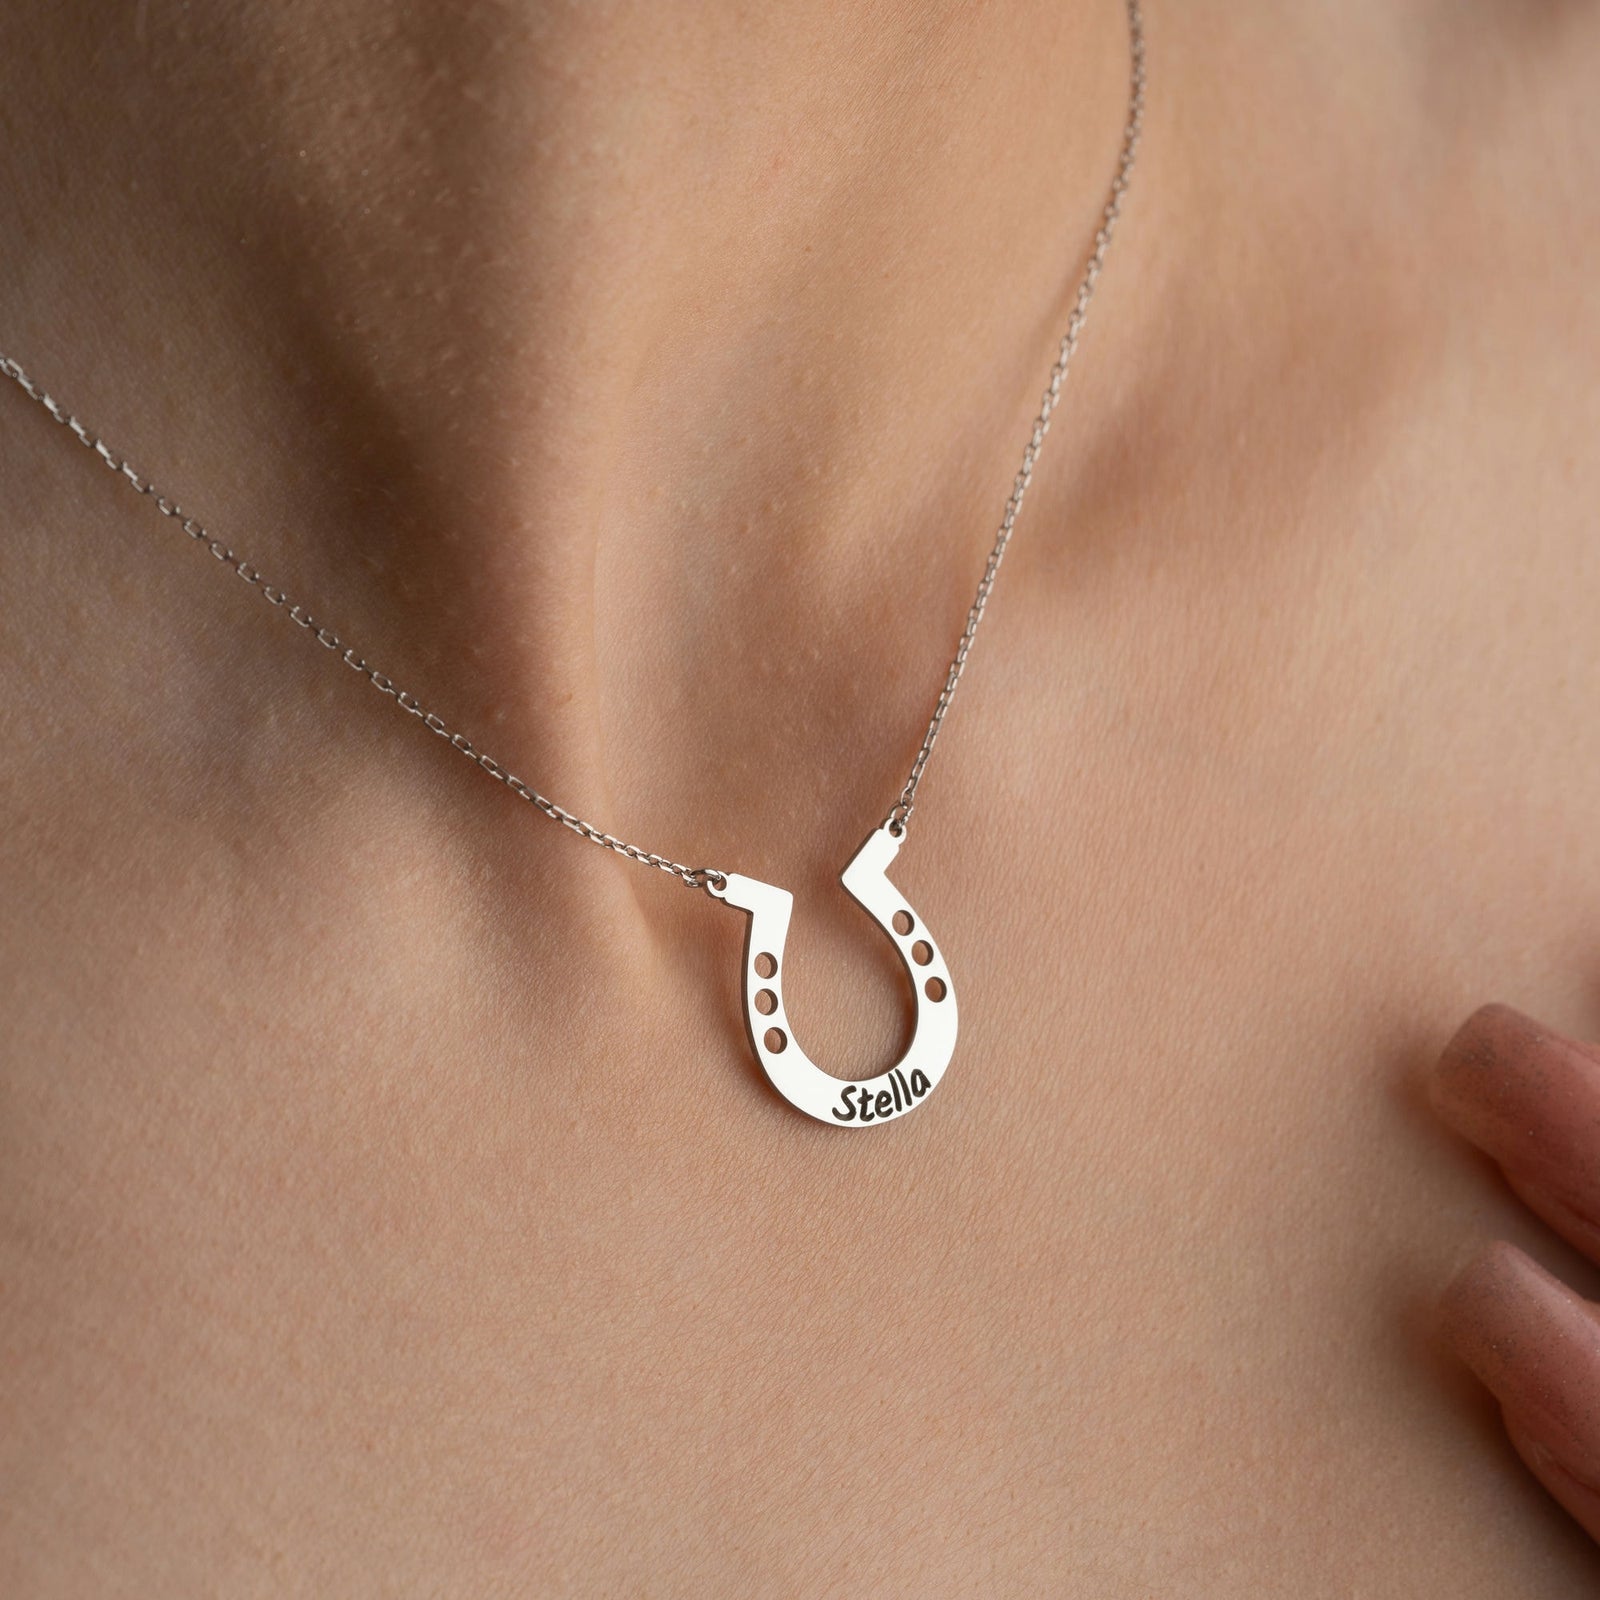 Horseshoe Necklace With Name In Sterling Silver